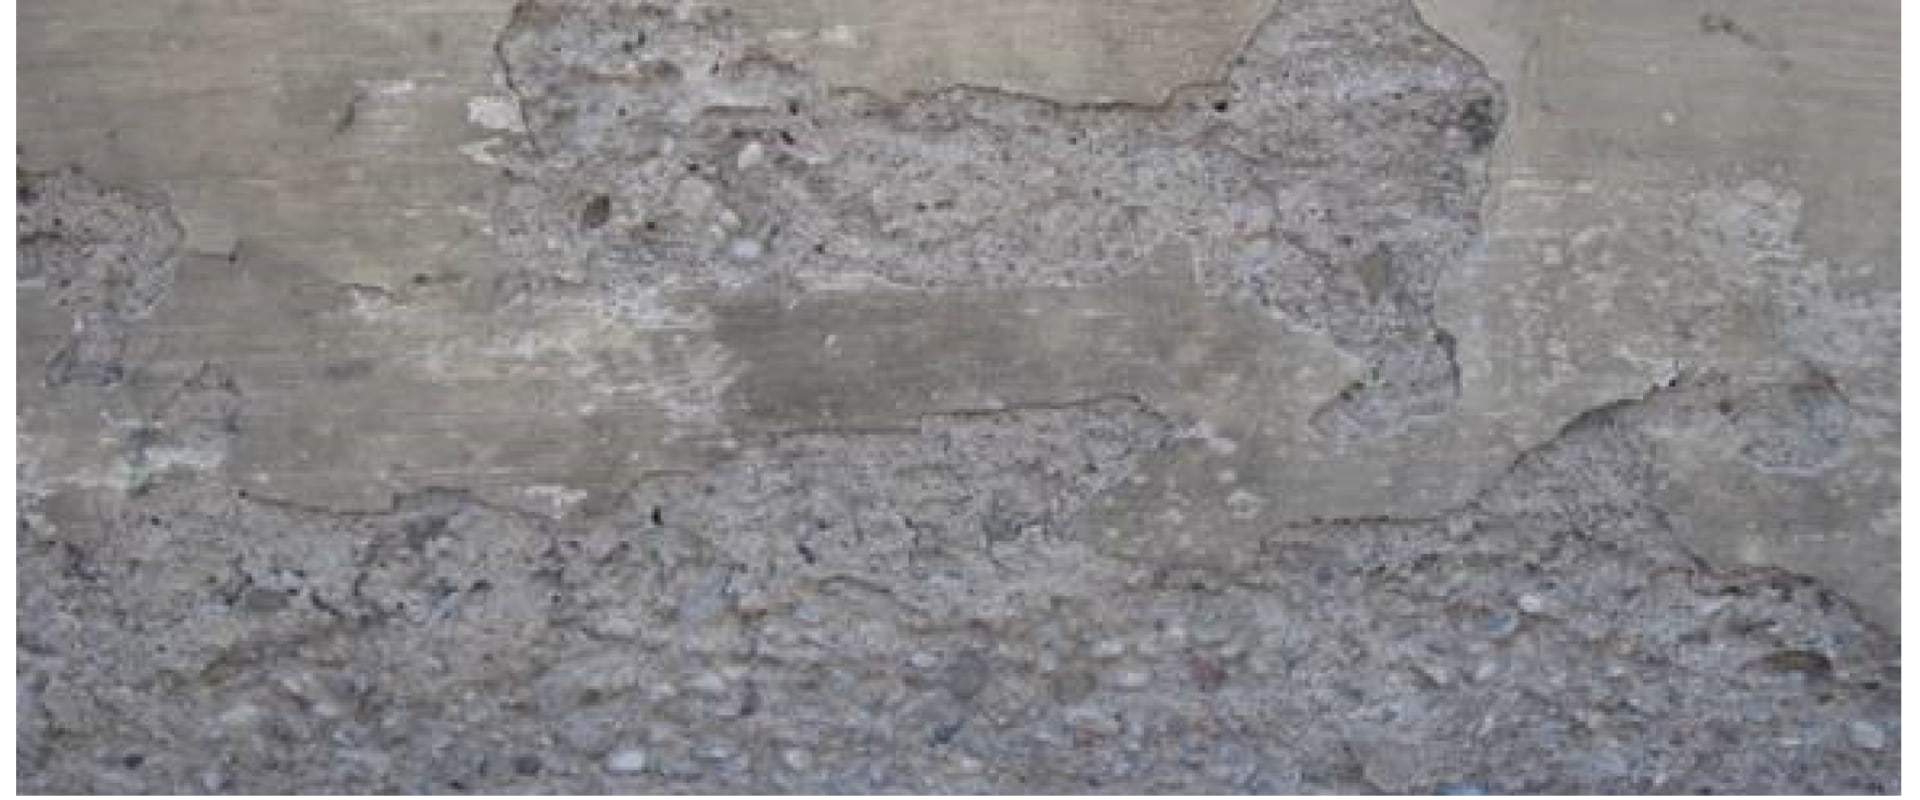 Does Insurance Cover Concrete Flaking?